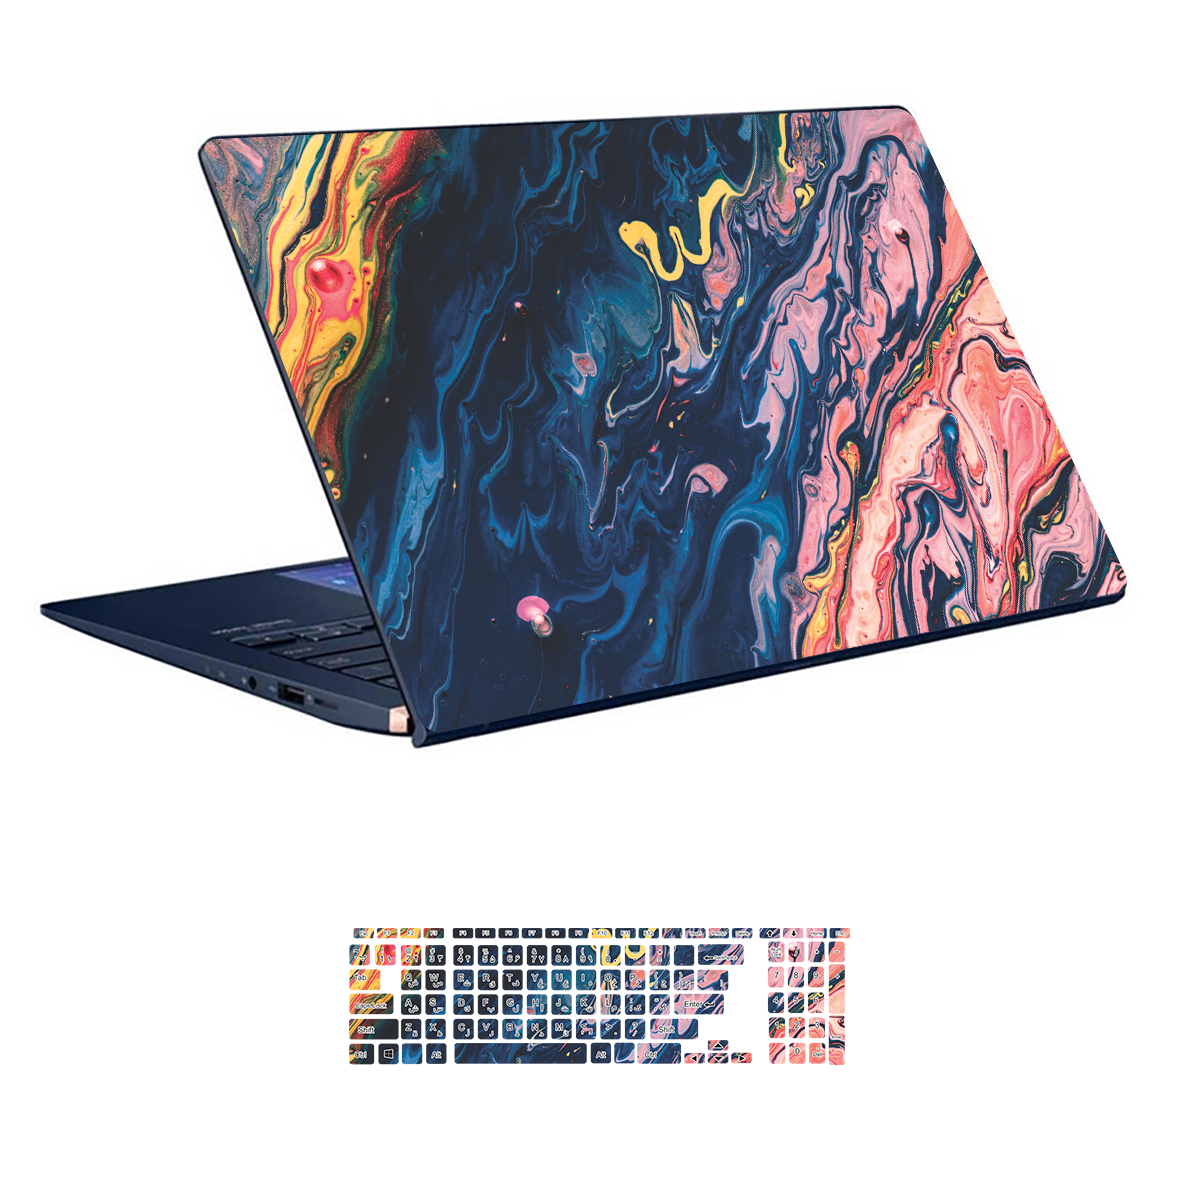 Colorful design laptop skin code 50 with keyboard sticker